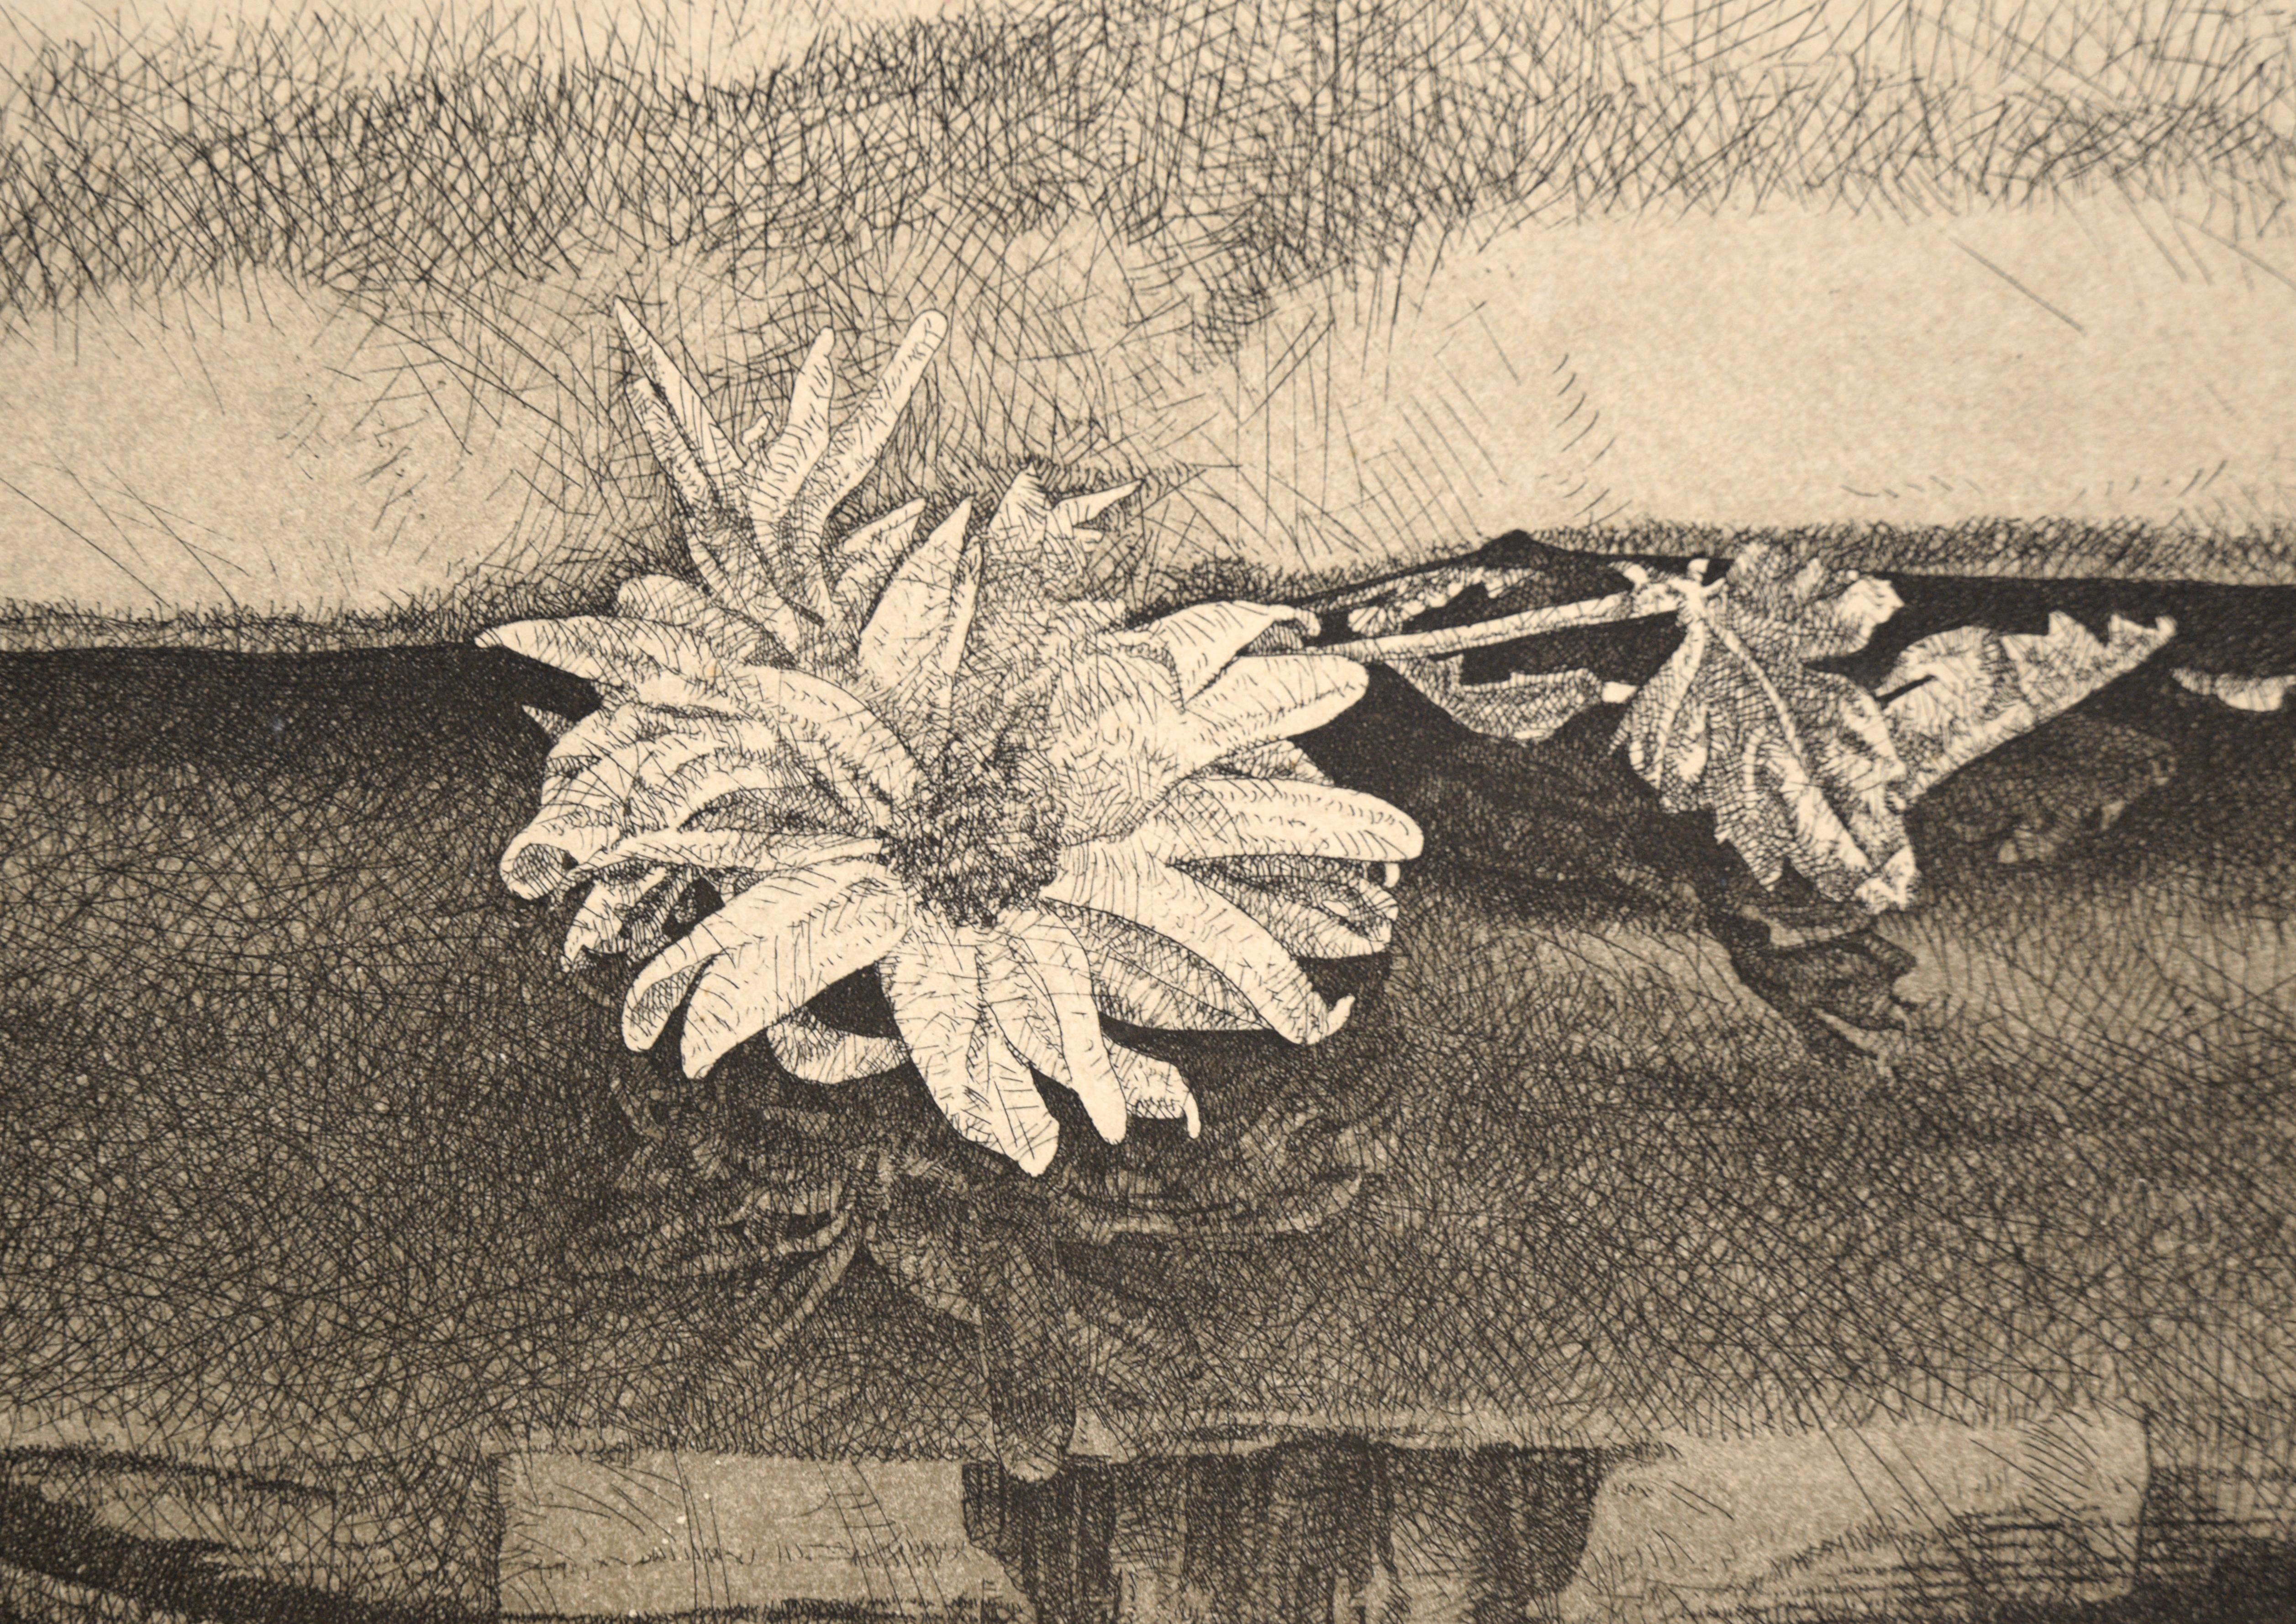 Finely balanced etching by Benjamin Vasserman (Estonian, b 1949). A squash sits atop a small black box with a latch. There is a drapery behind the squash, providing a backdrop. In the foreground of the composition, a few flowers and leaves are laid